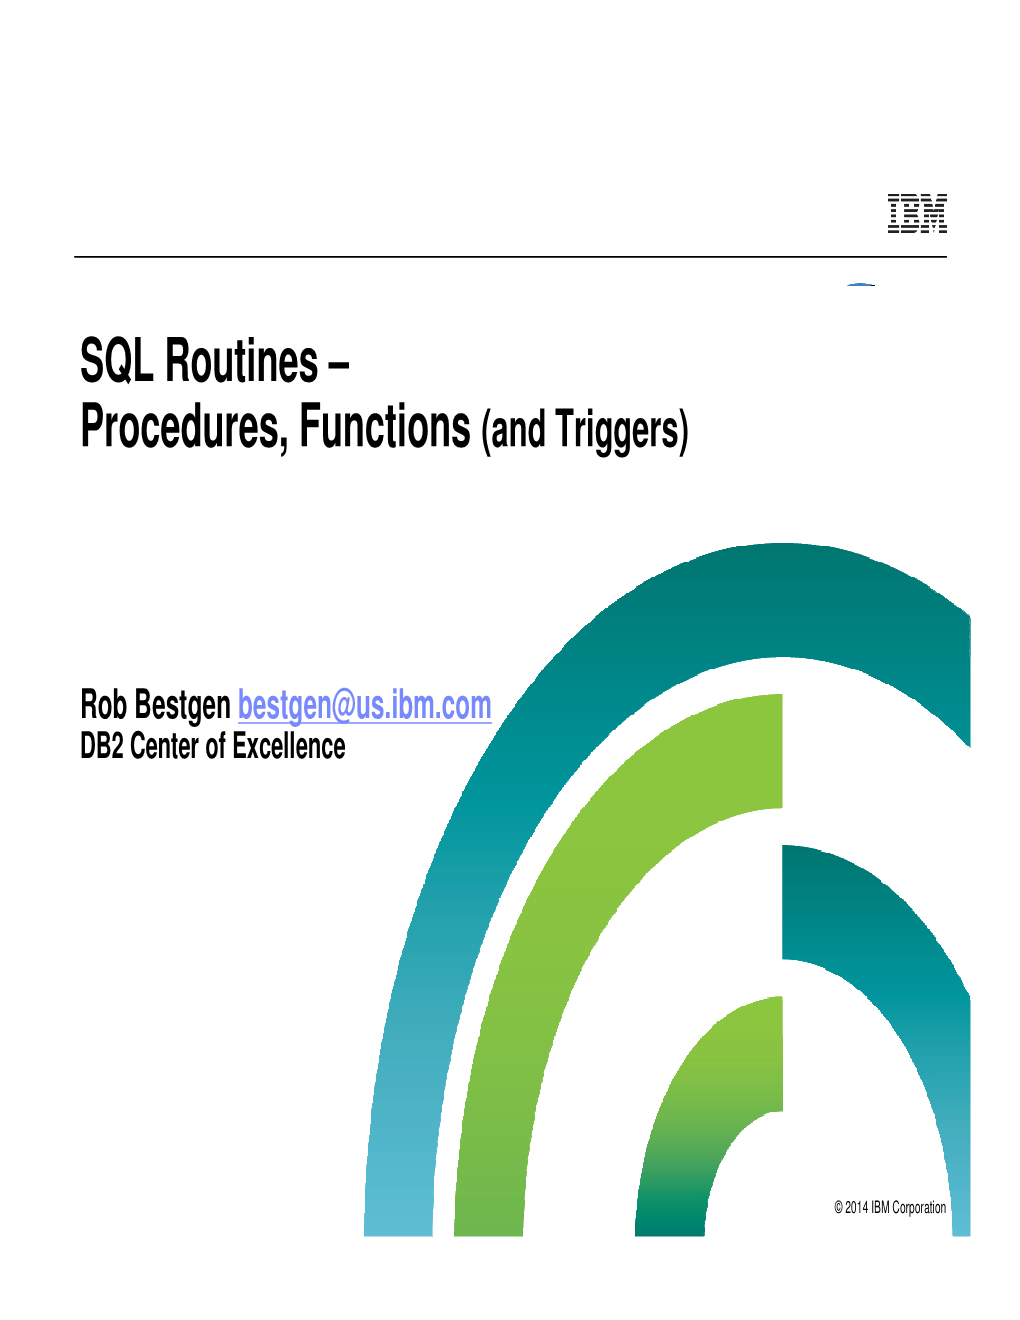 SQL Routines – Procedures, Functions (And Triggers)